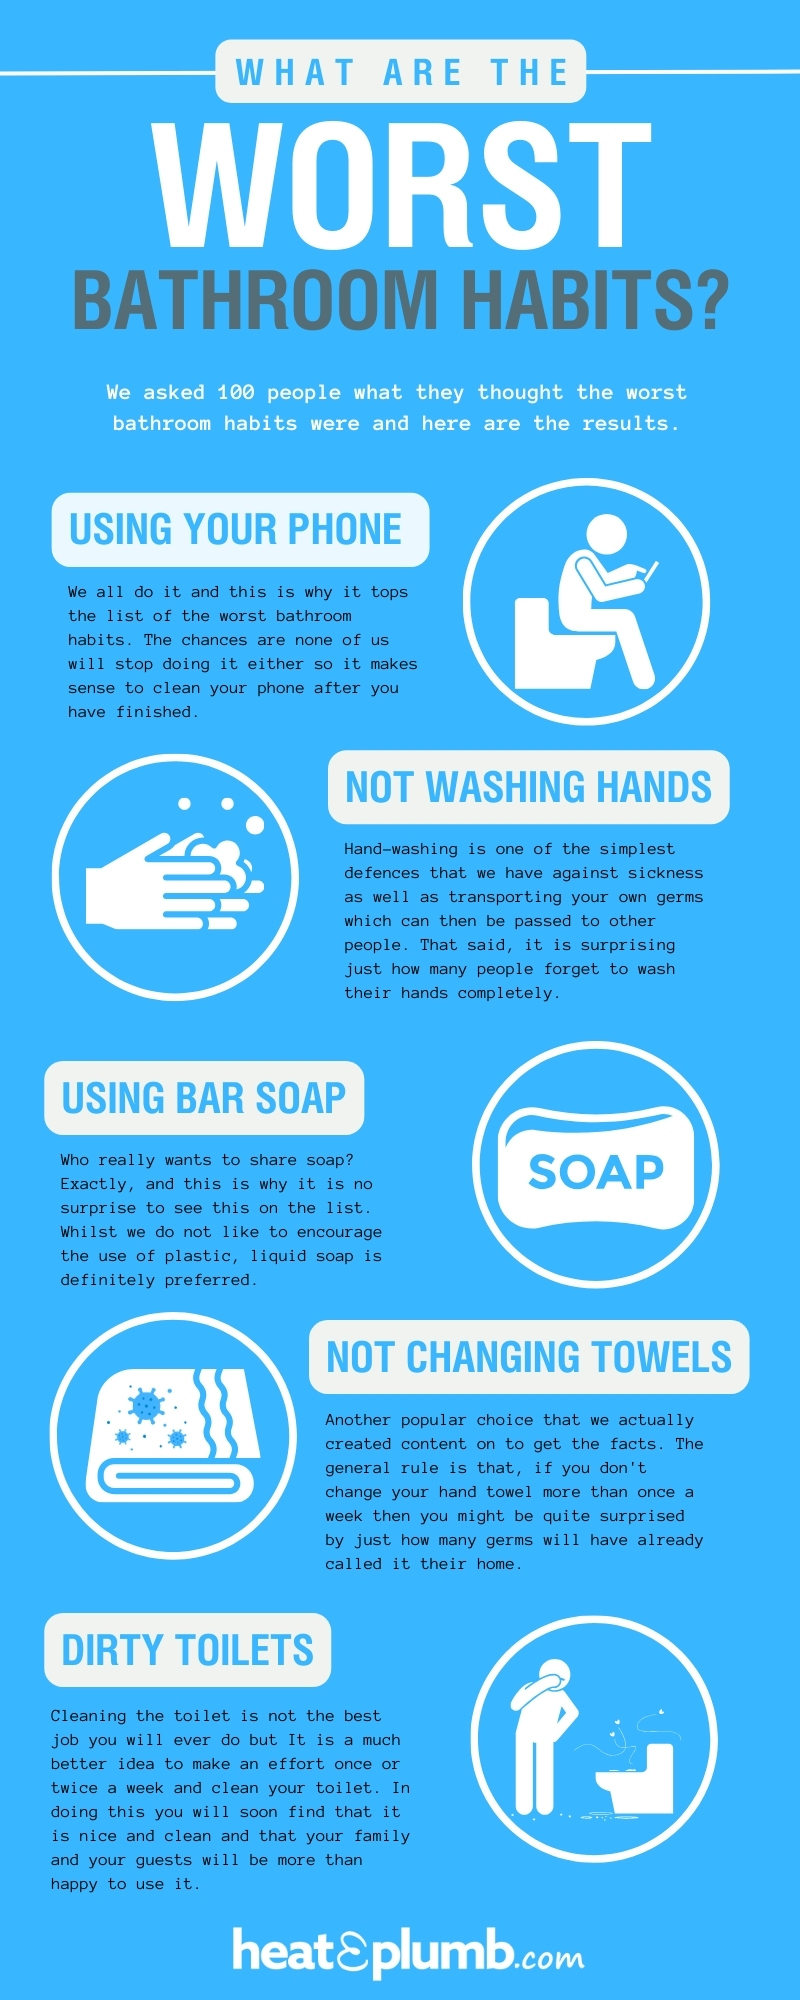 What are the Worst Bathroom Habits? - Infographic